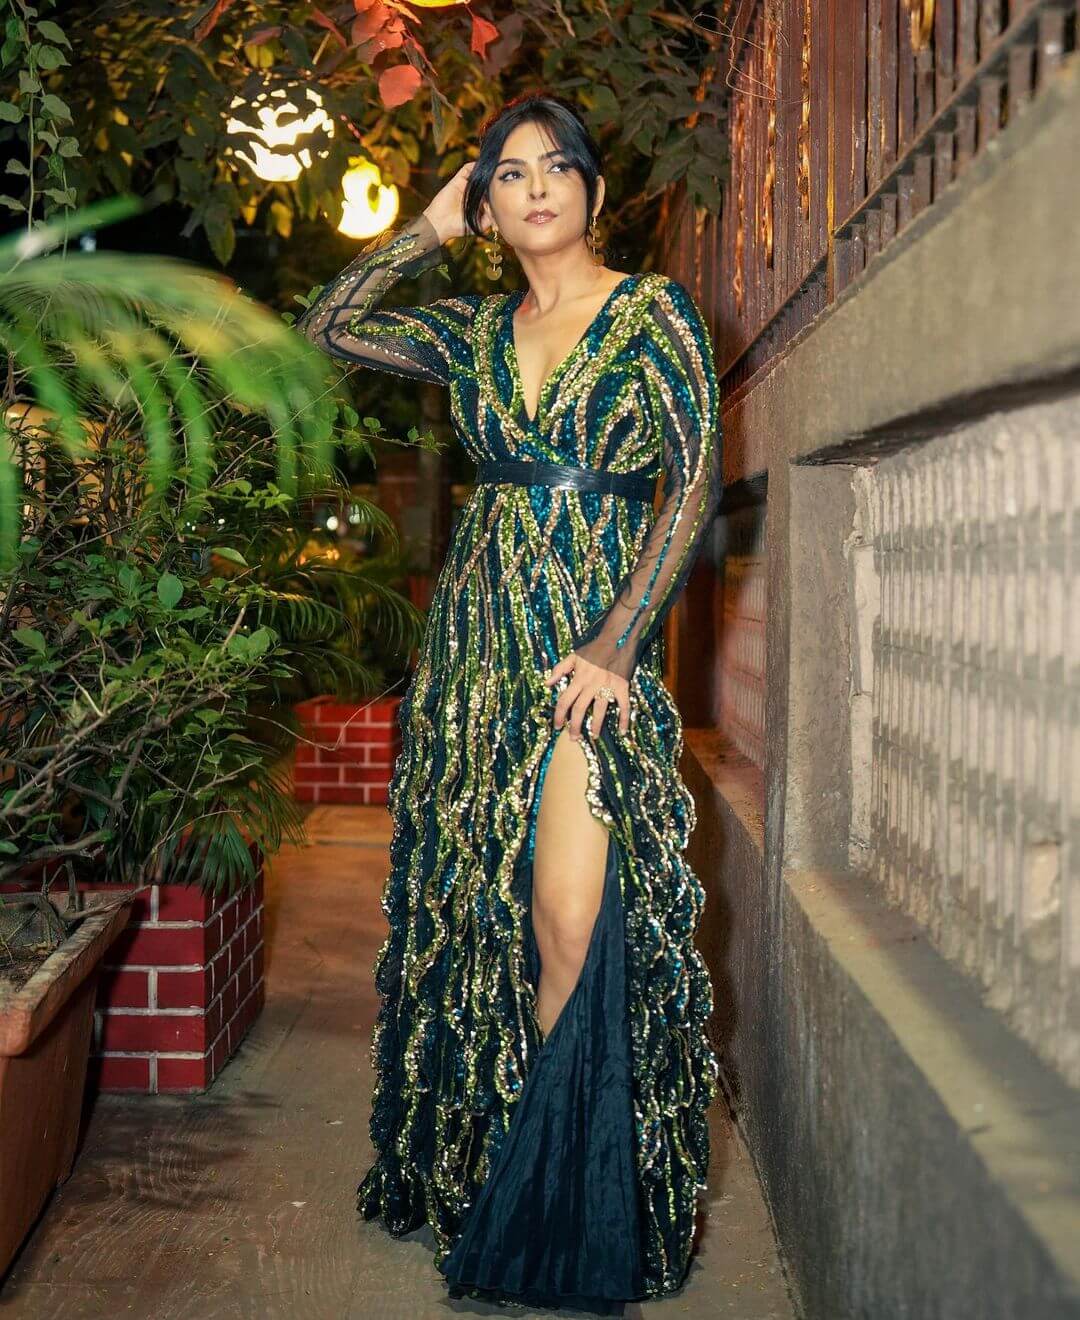 Madhurima Tuli Bling The Sexy Green With Golden Gown With High Slit